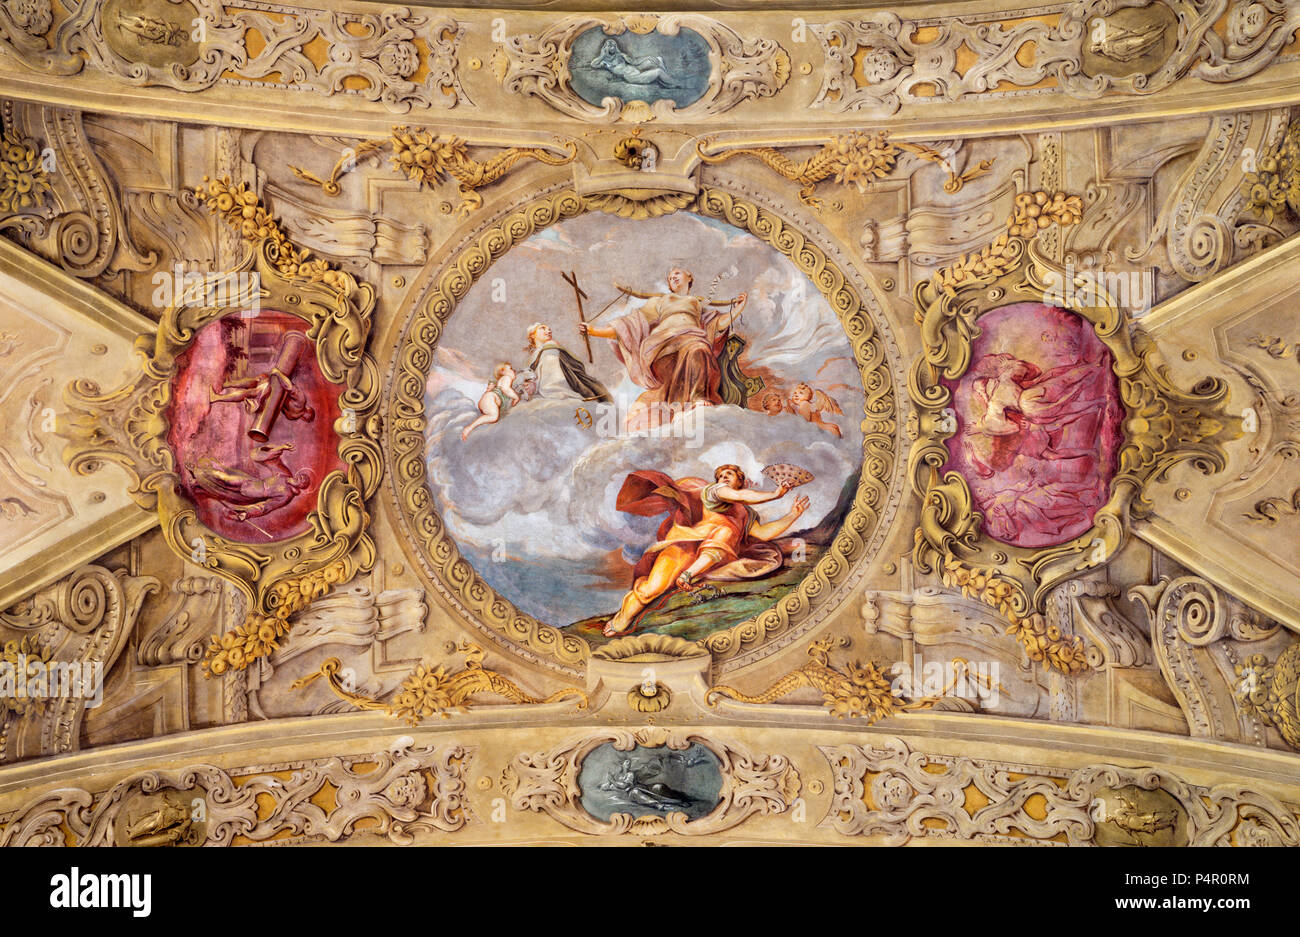 Baroque Ceiling Stock Photos Baroque Ceiling Stock Images